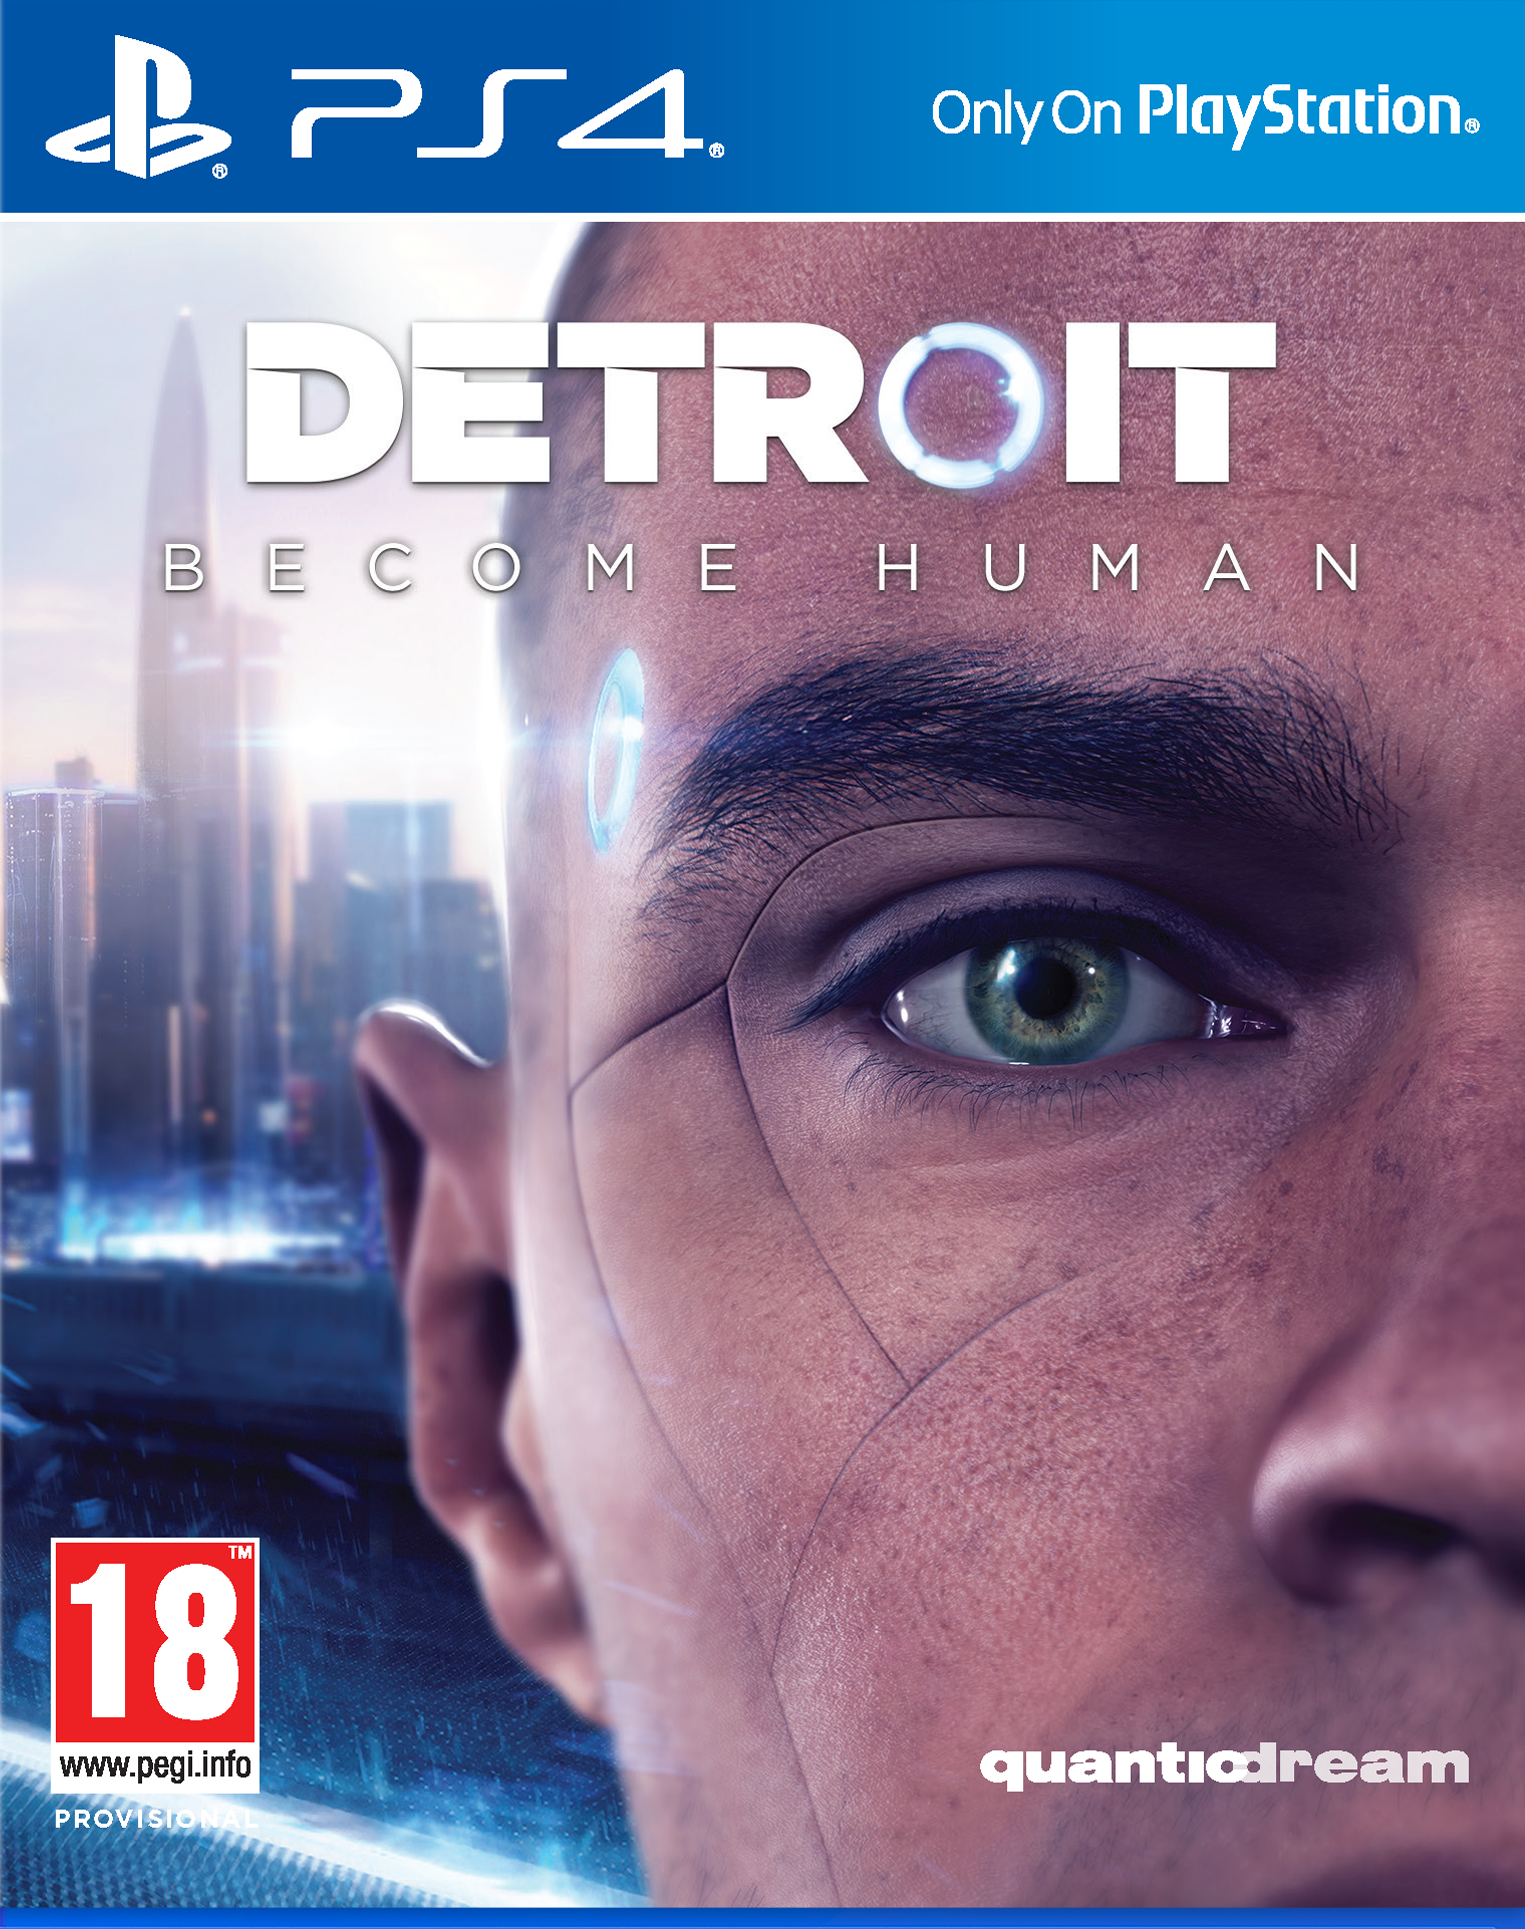 Detroit: Become Human, Sony